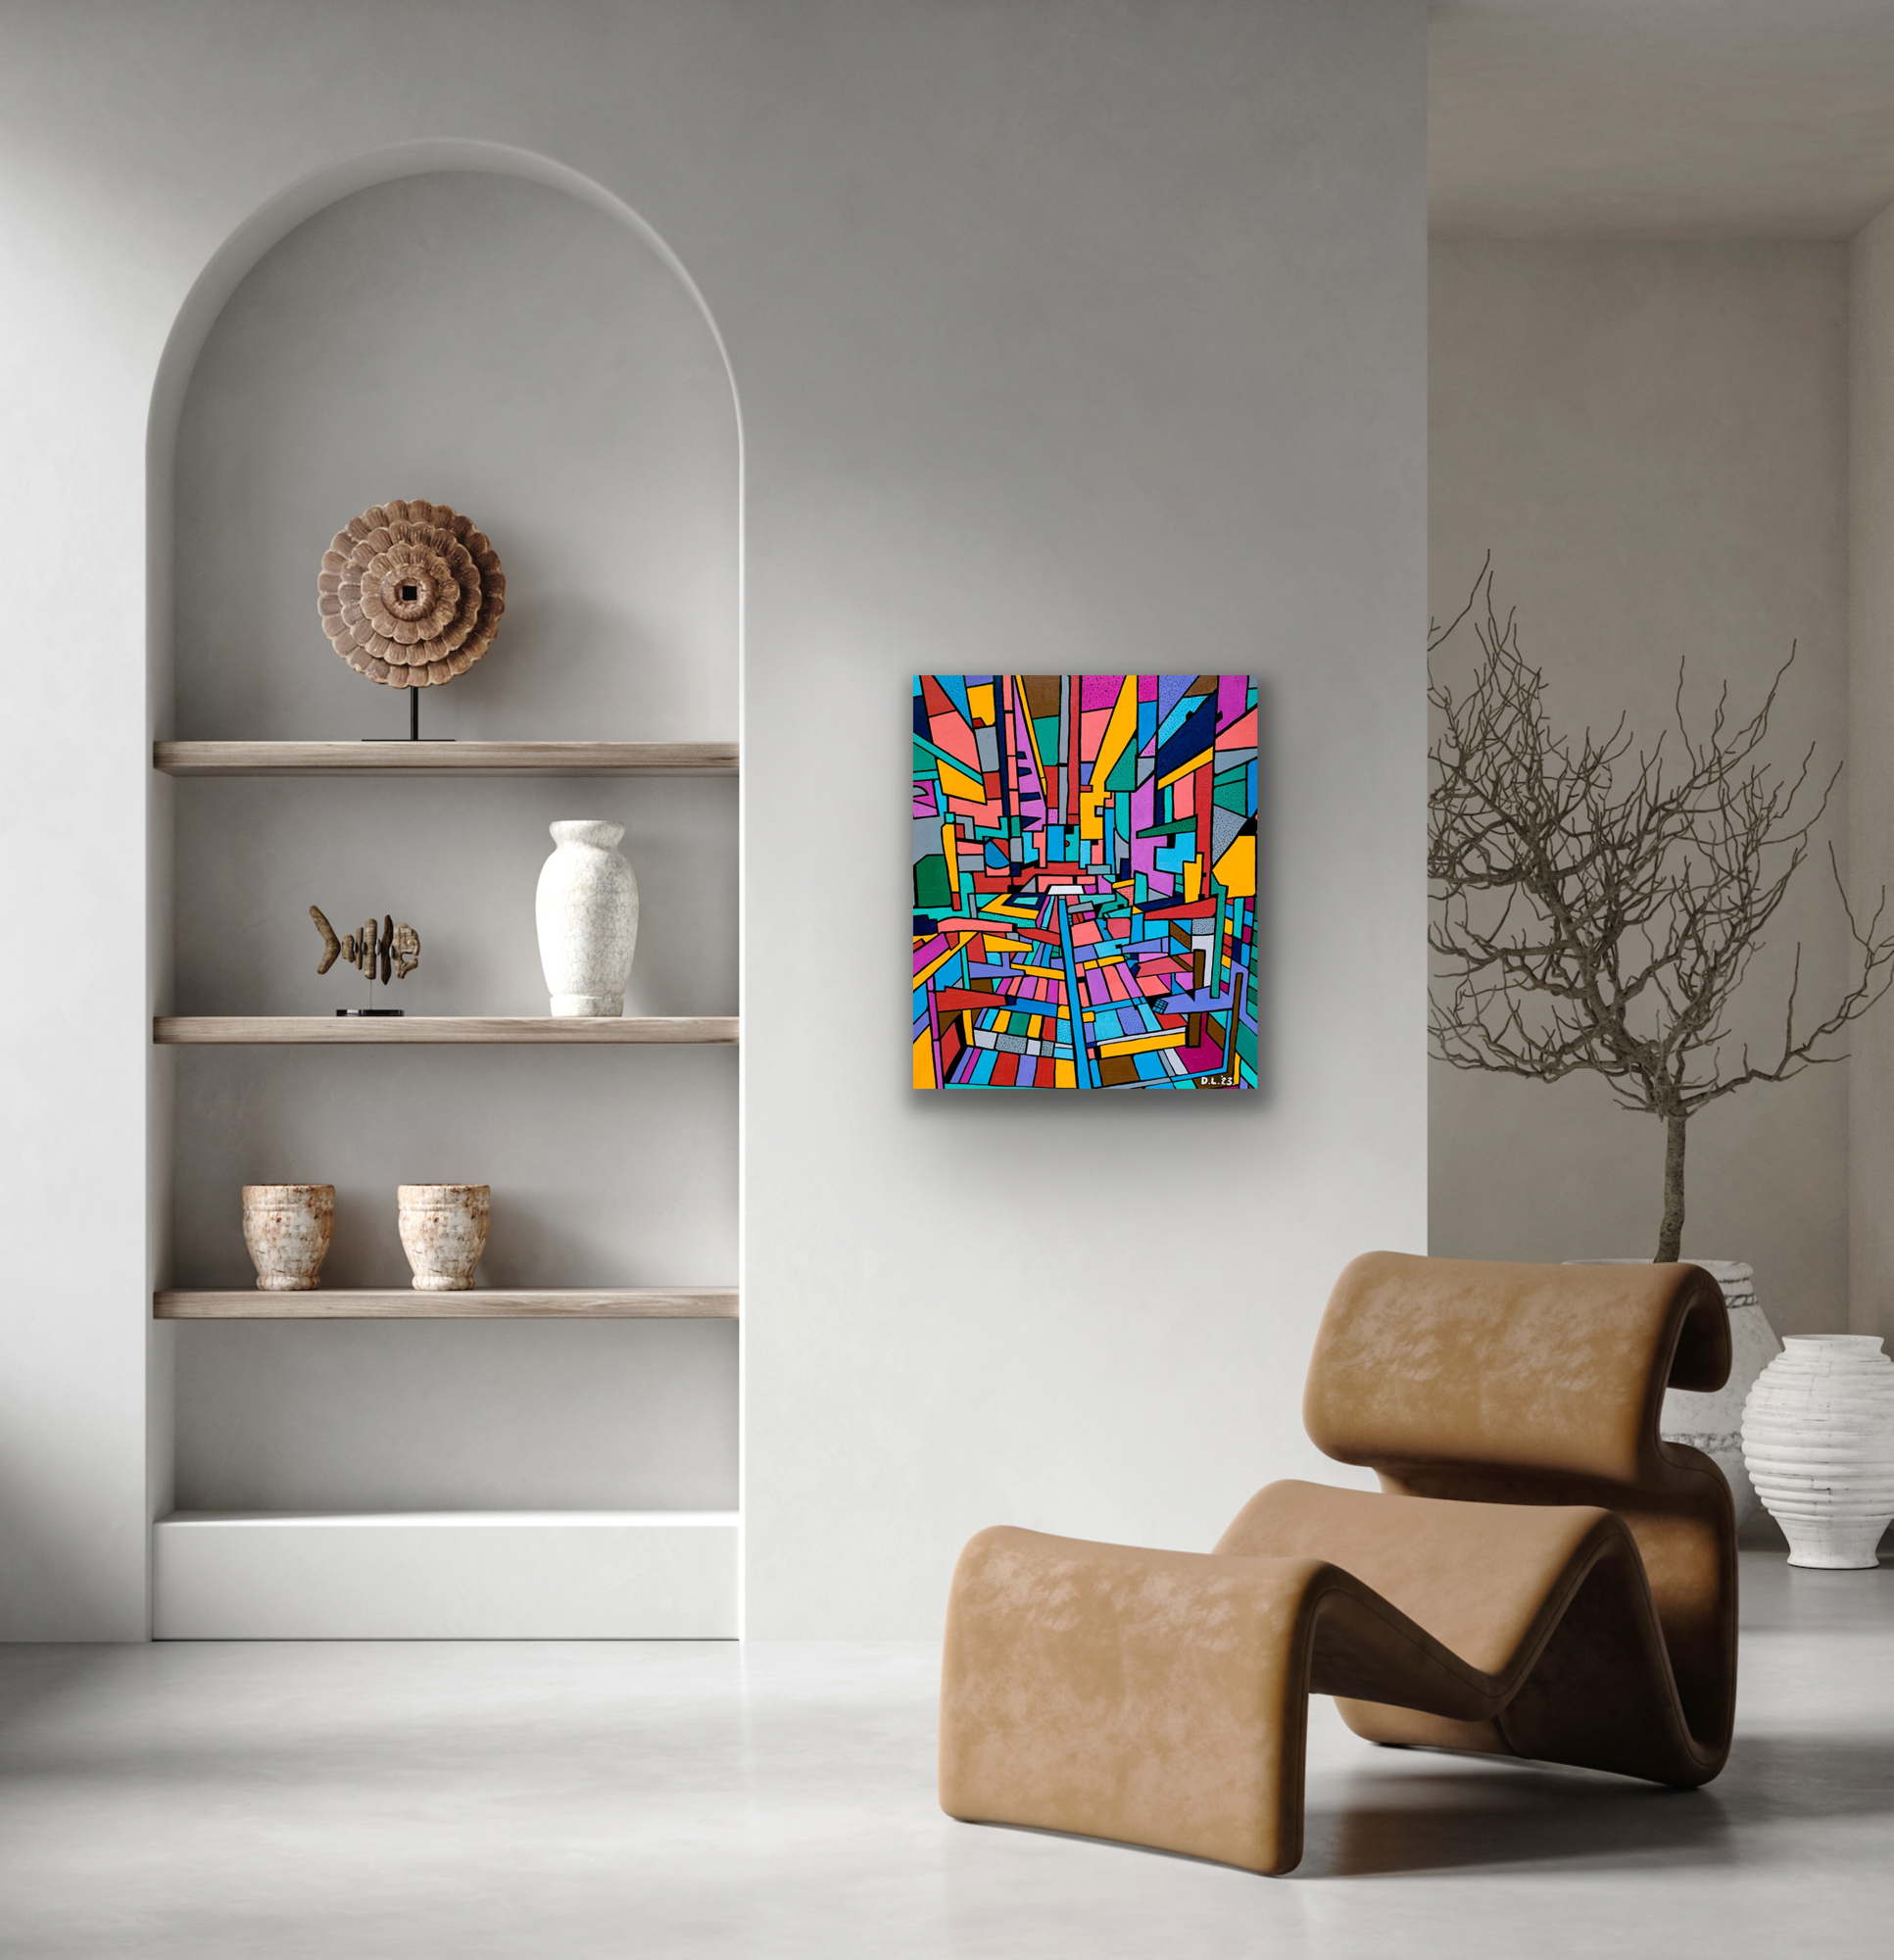 The work of art comes in three different canvas print sizes.